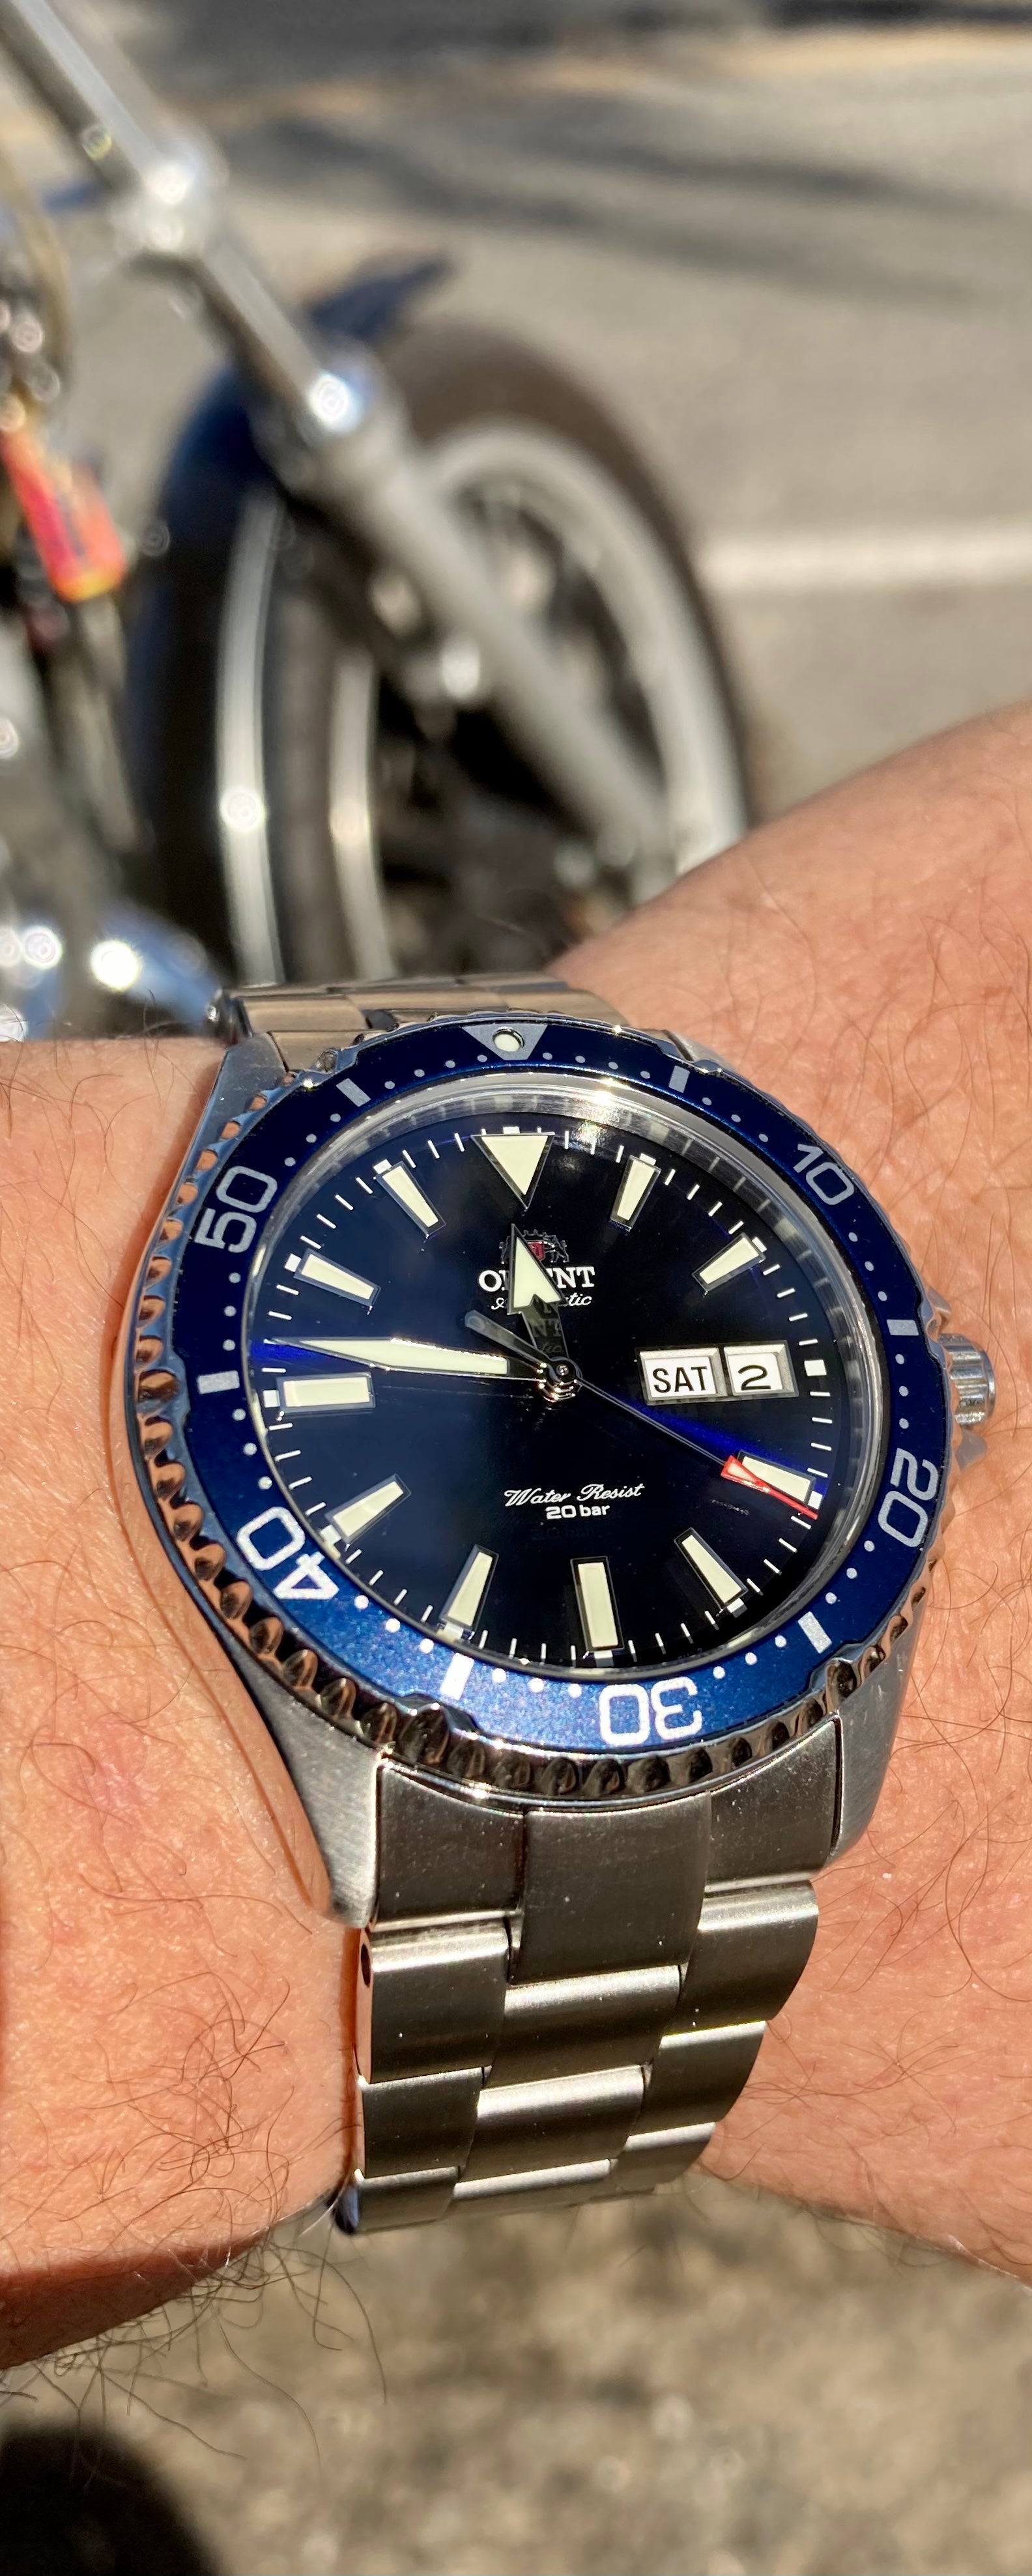 The Latest SEIKO 5 Sport GMT, the Best Watch Collection Bargain Ever!! -  Strapcode